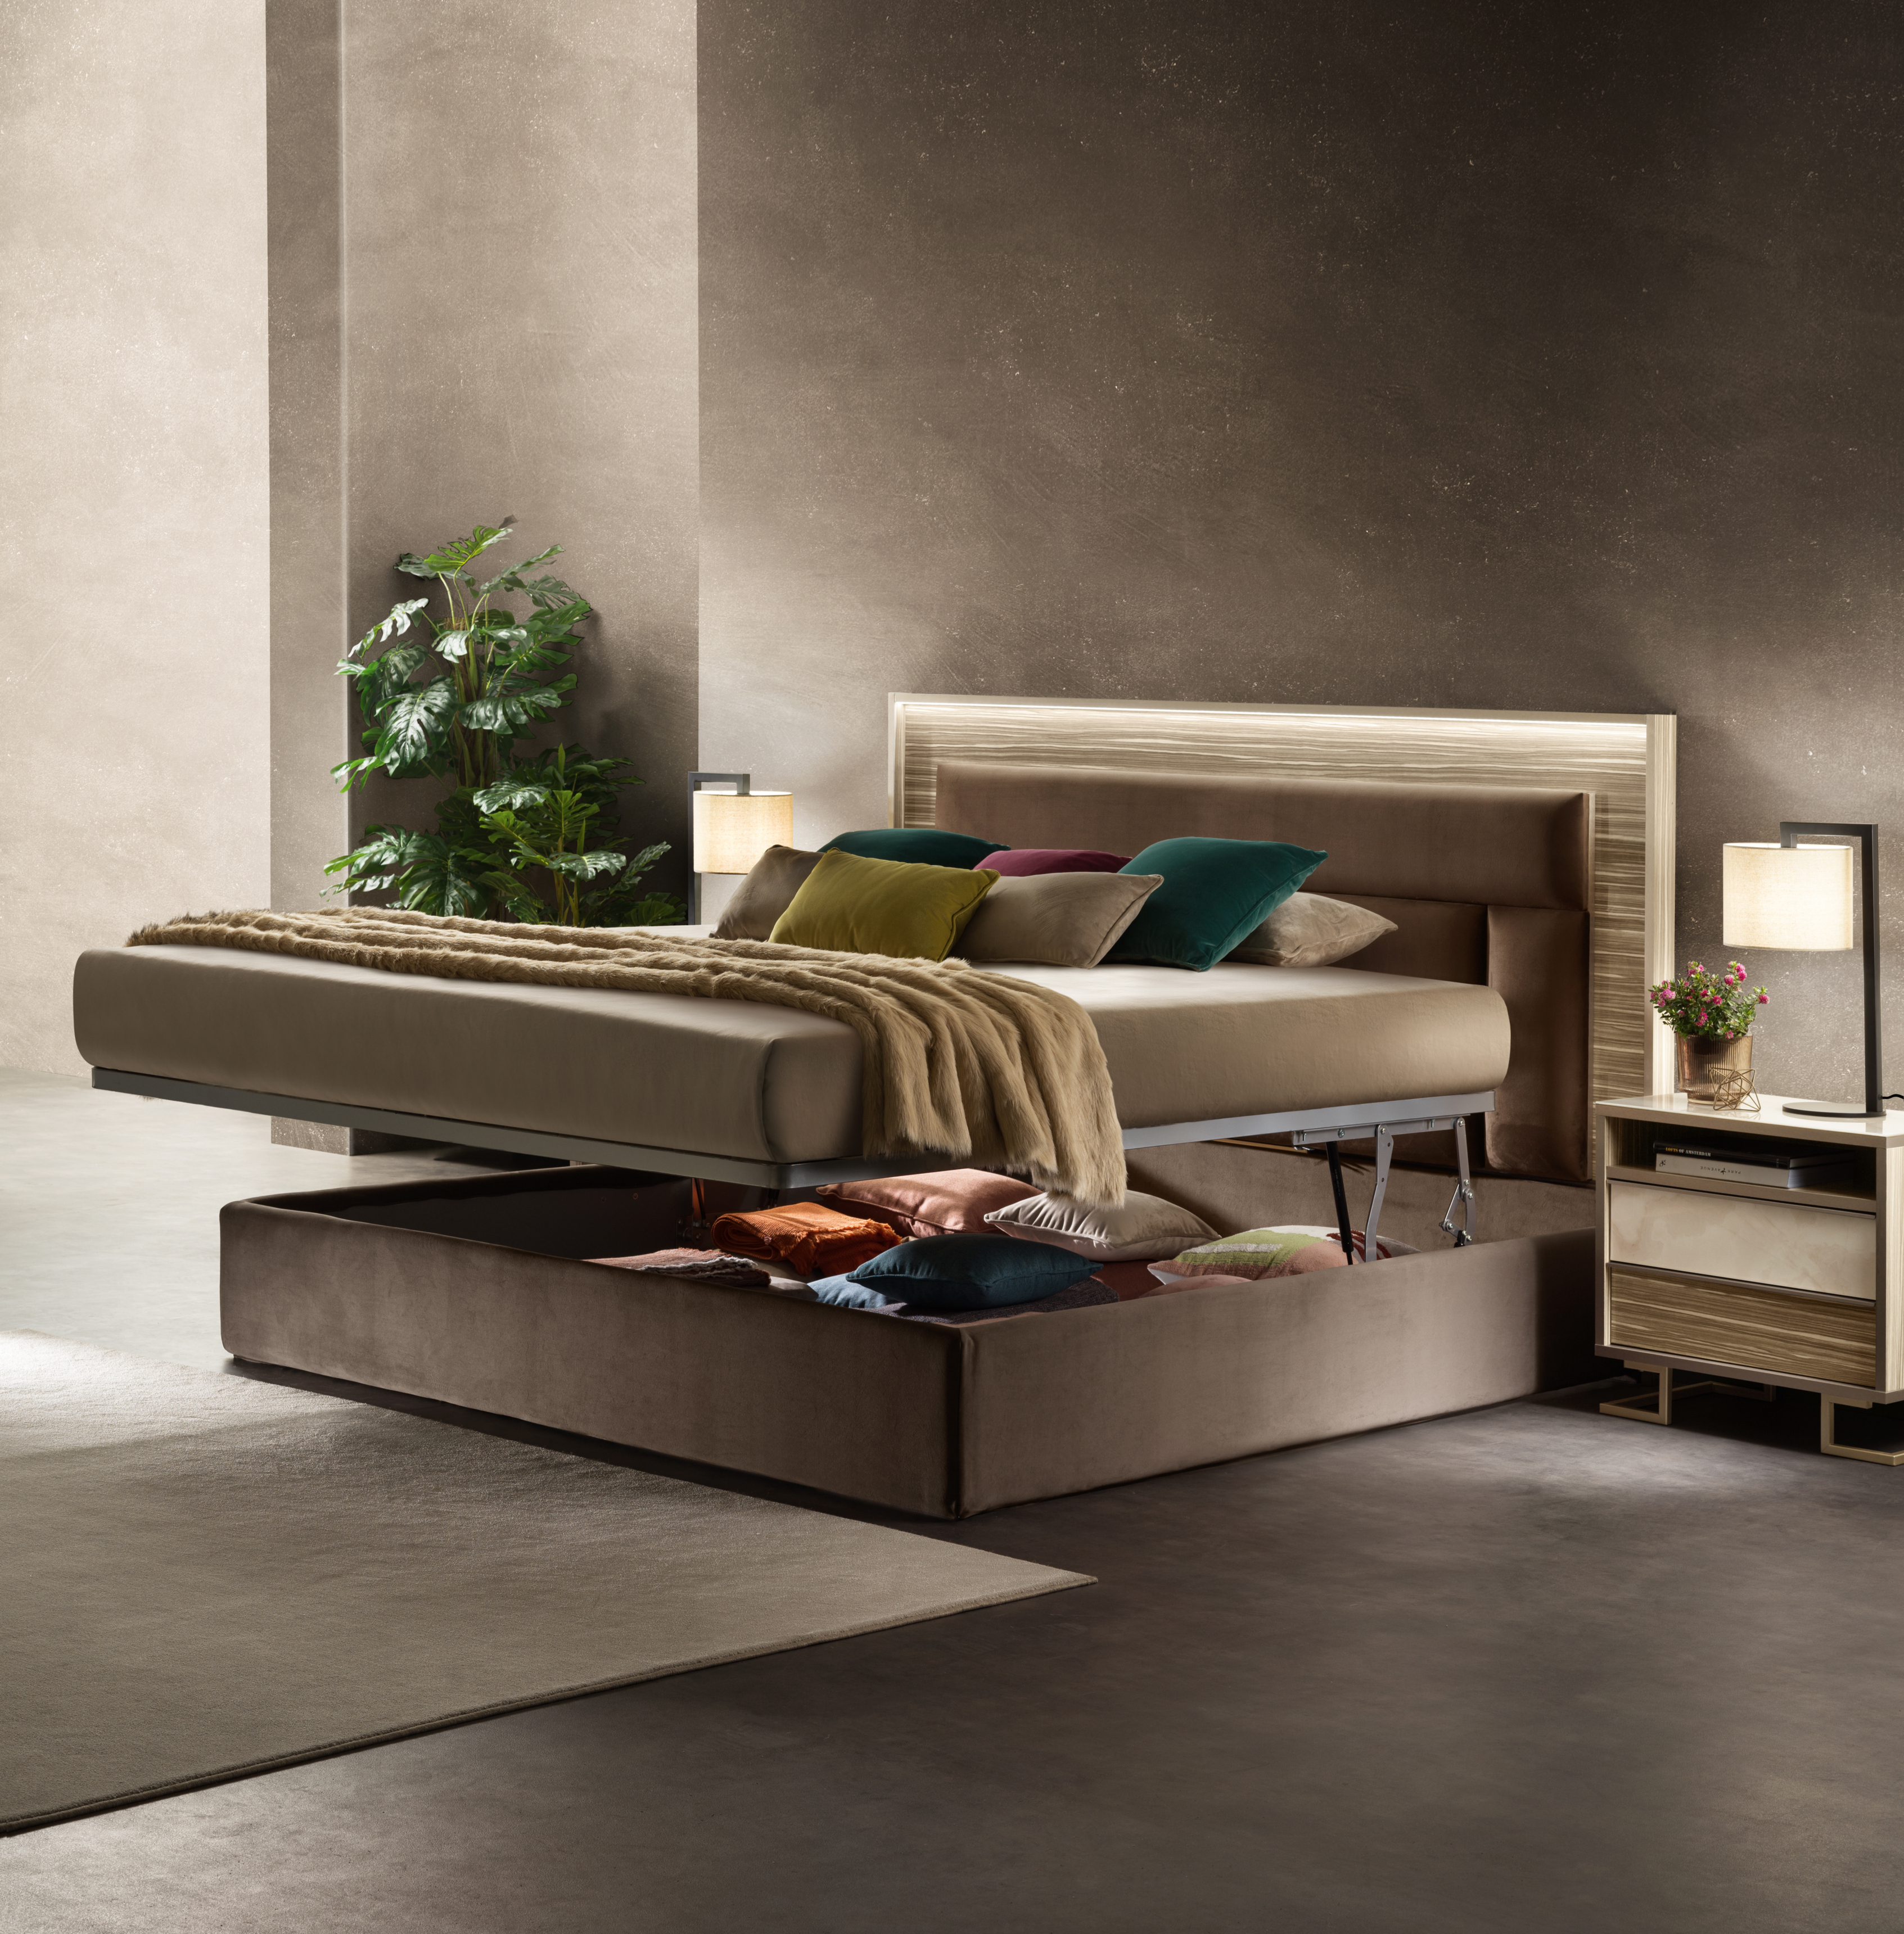 Adora Luce Light upholstered bed with storage